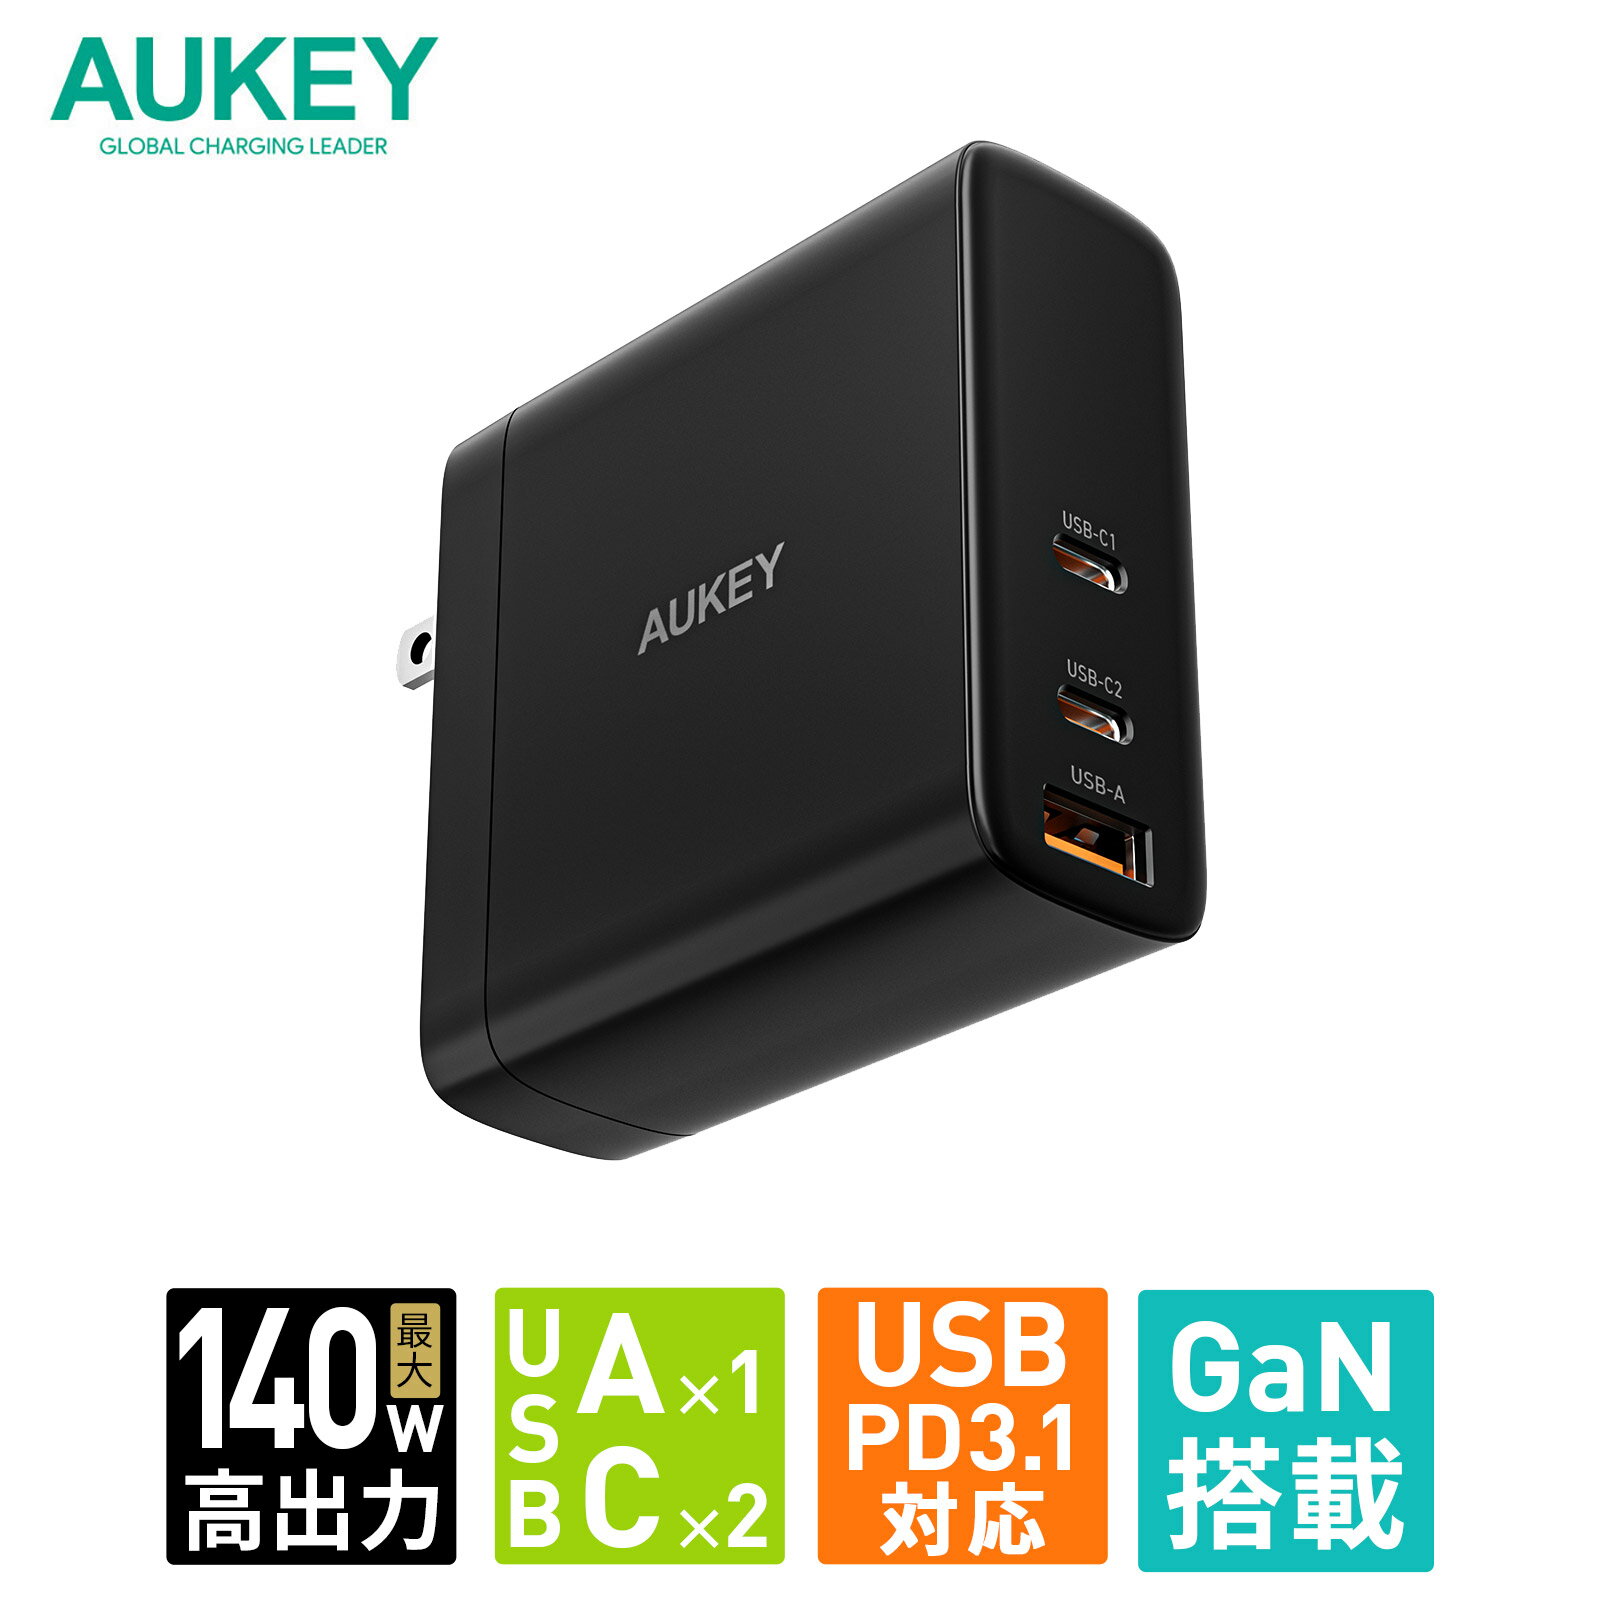 AUKEY USB充電器 Type-A Type-C 3ポート 単ポート最大出力140W Omnia II Mix PA-B8 ACアダプター iPhone Android スマホ ノートPC タブレット タイプA タイプC USB-A USB-C PD PPS QC FCP AFC …